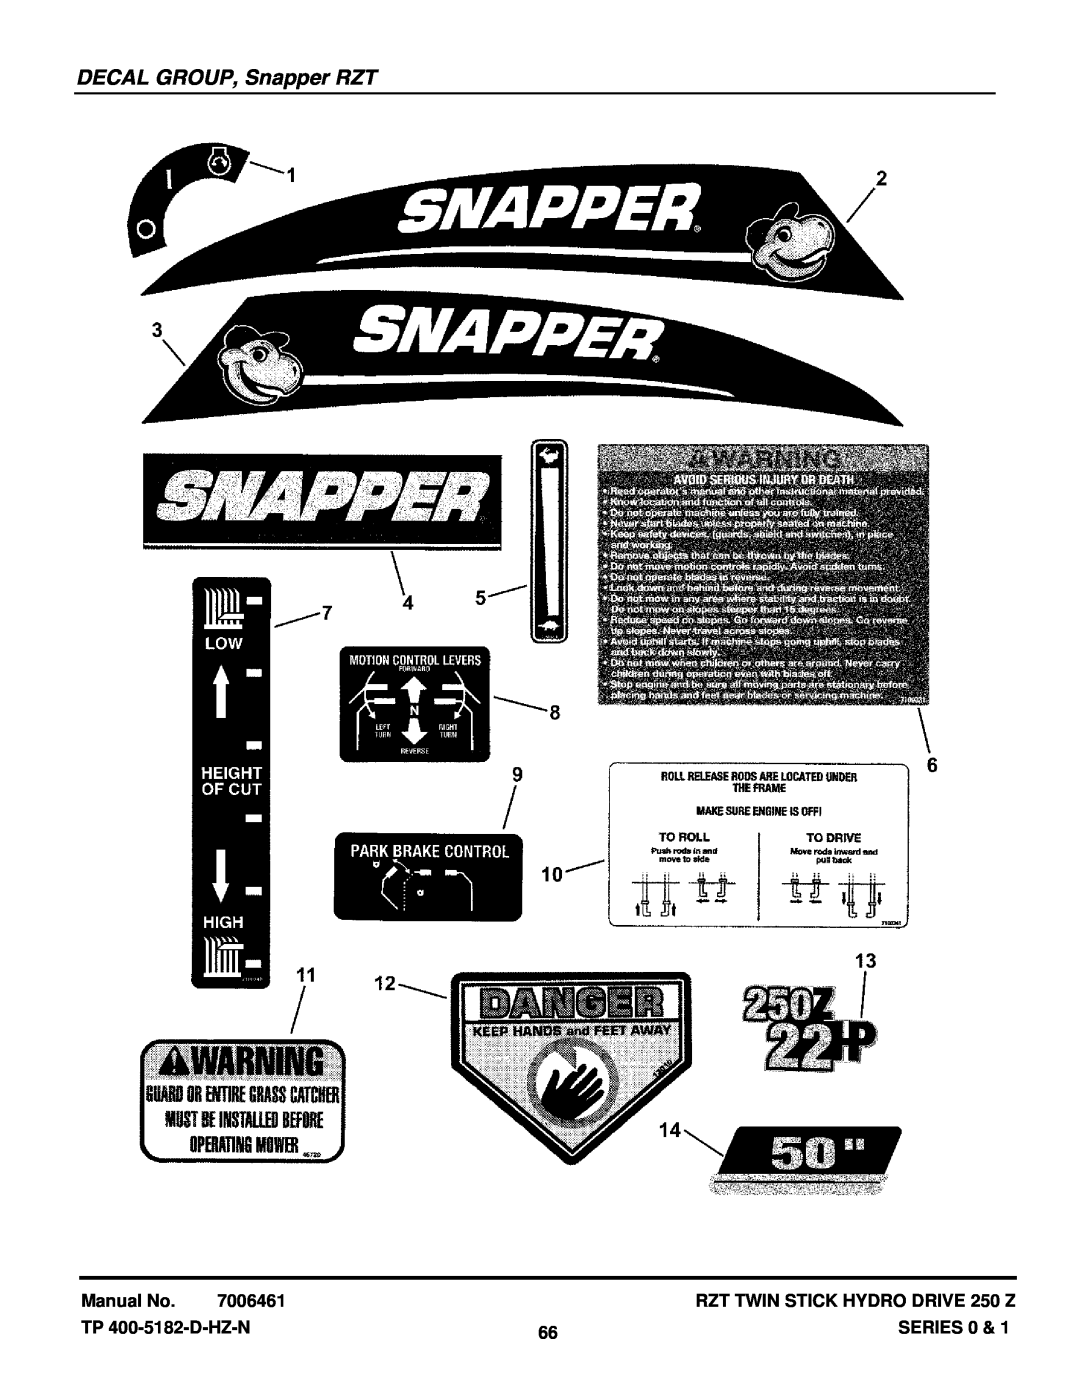 Snapper ERZT185440BVE, ERZT20441BVE2, RZT22500BVE2, RZT22501BVE2 DECAL GROUP, Snapper RZT, Manual No, 7006461, SERIES 0 